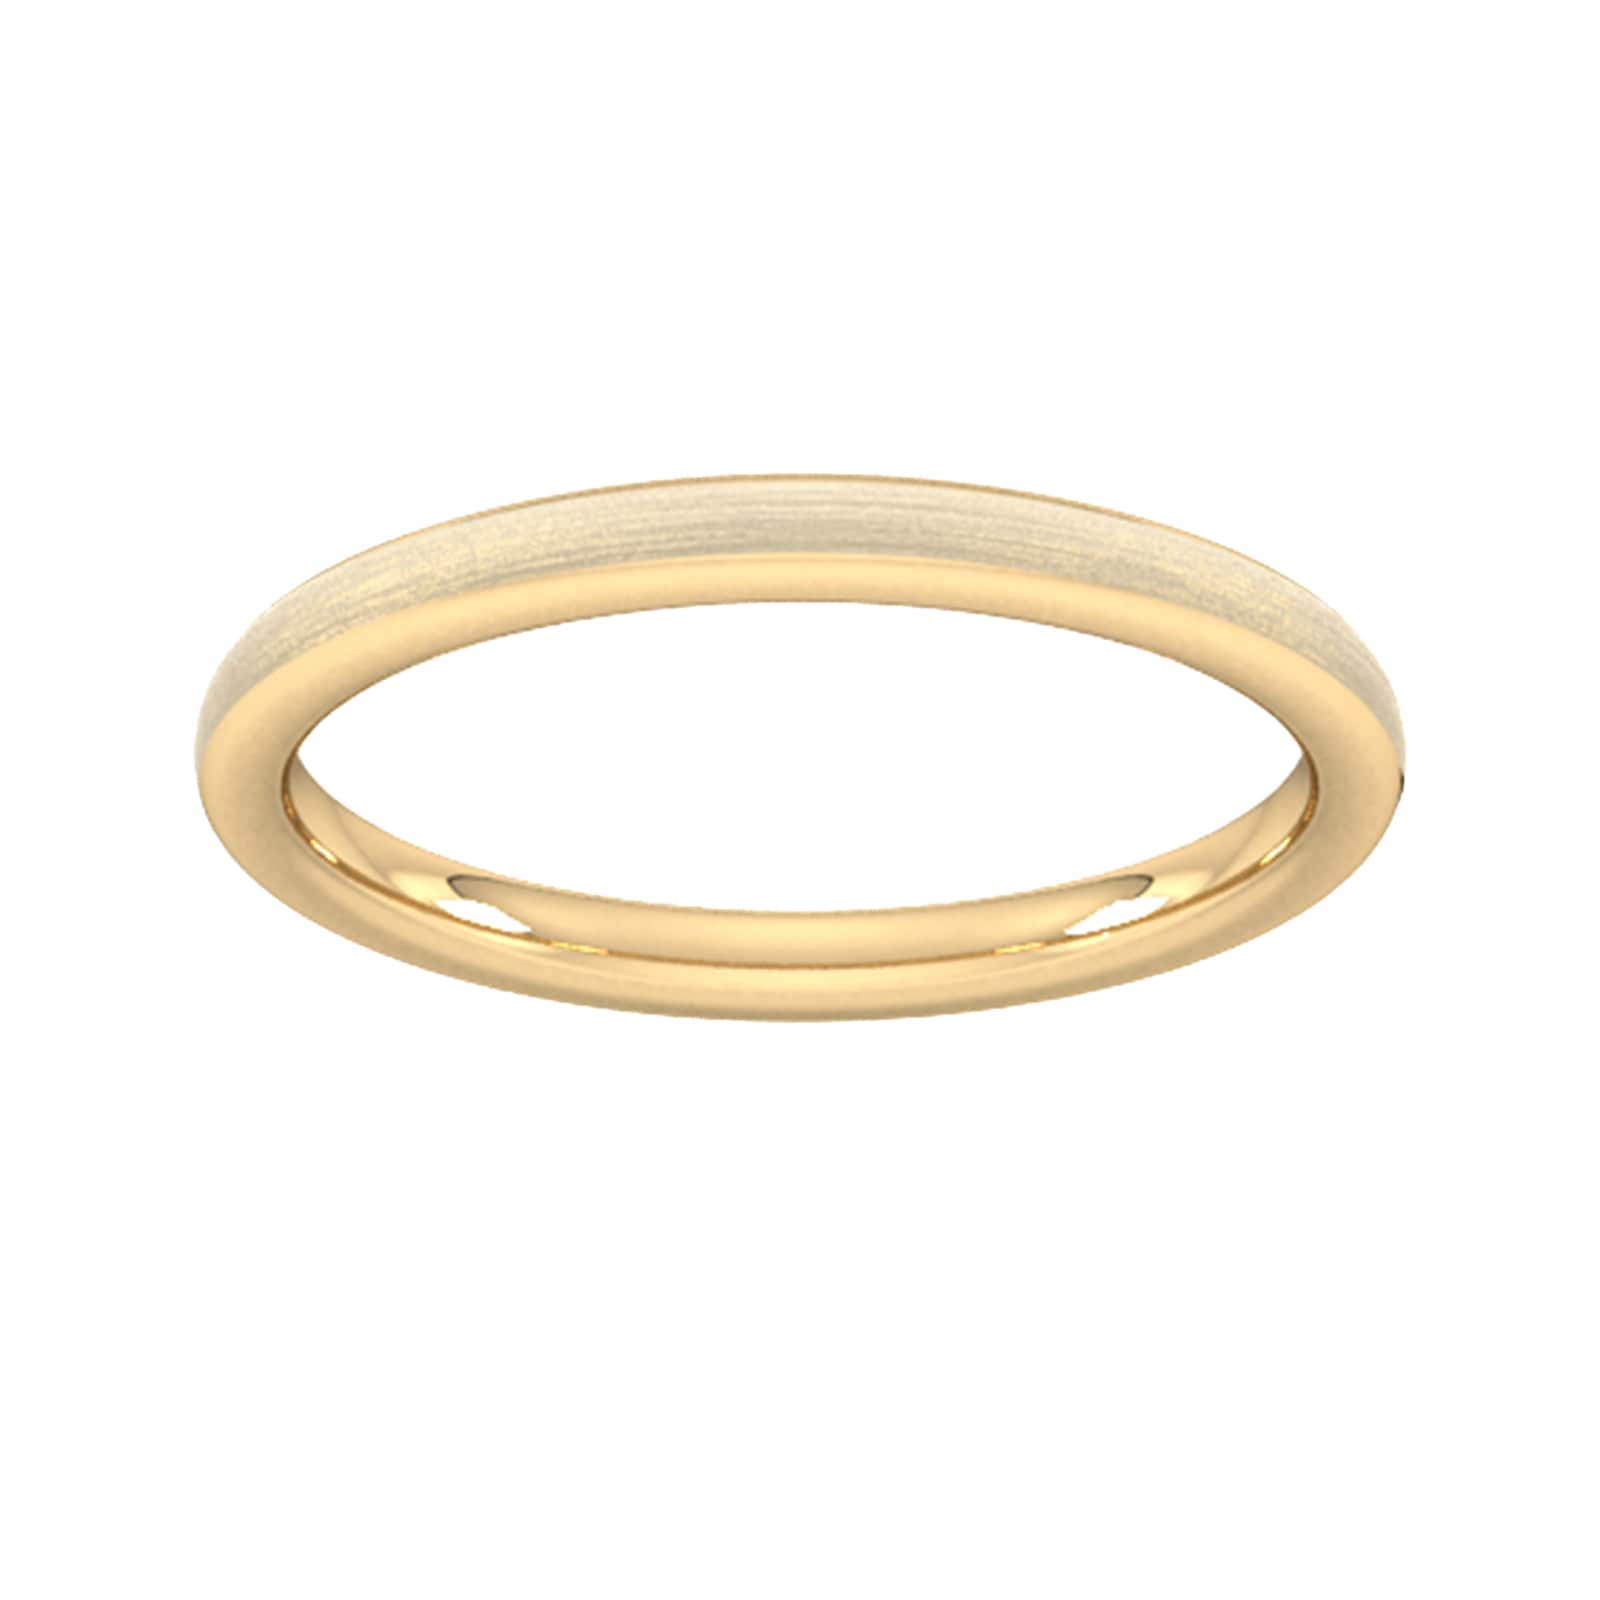 2mm D Shape Standard Matt Finished Wedding Ring In 9 Carat Yellow Gold - Ring Size O